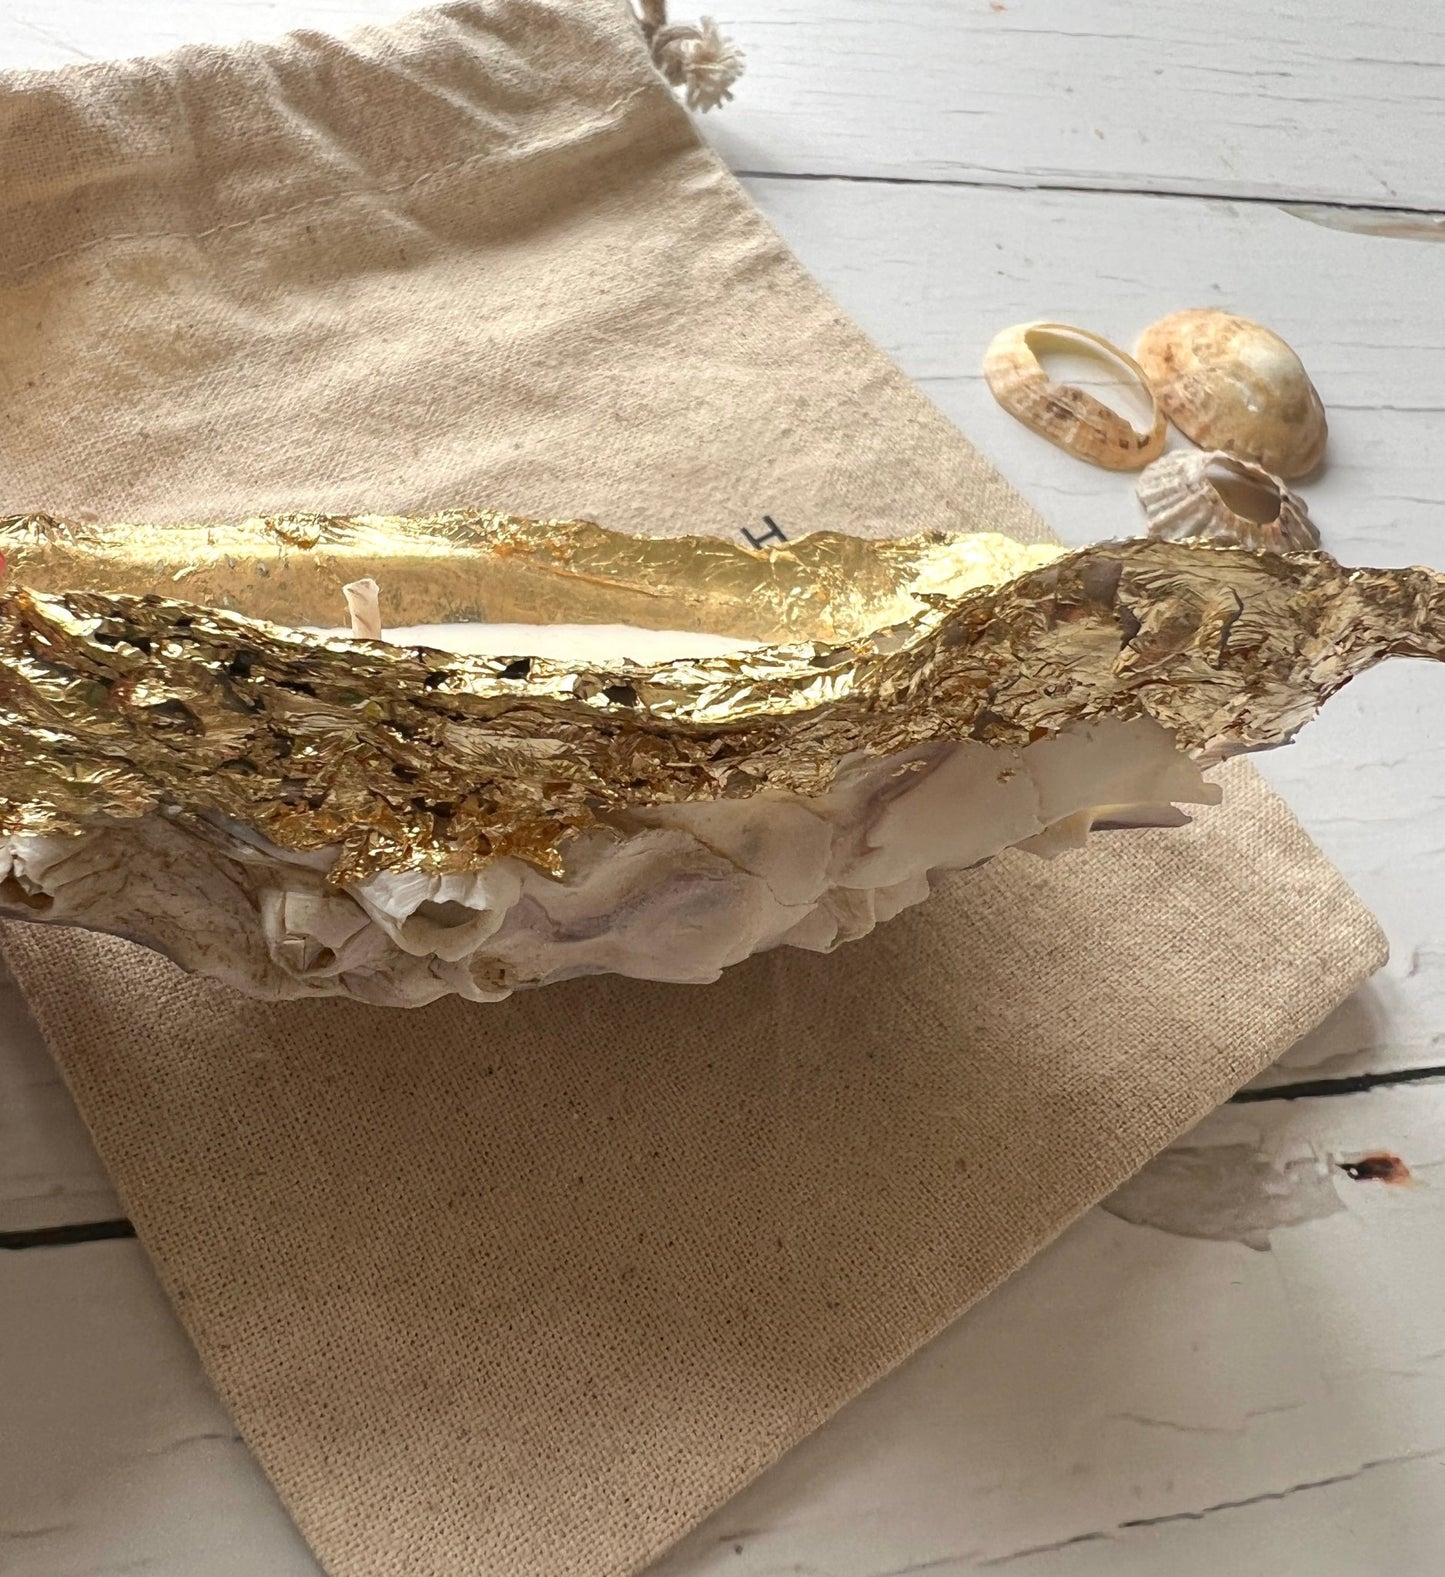 Gilded Oyster Shell Candle with Vegan Soy & Coconut Wax - Readymoney Beach Shop